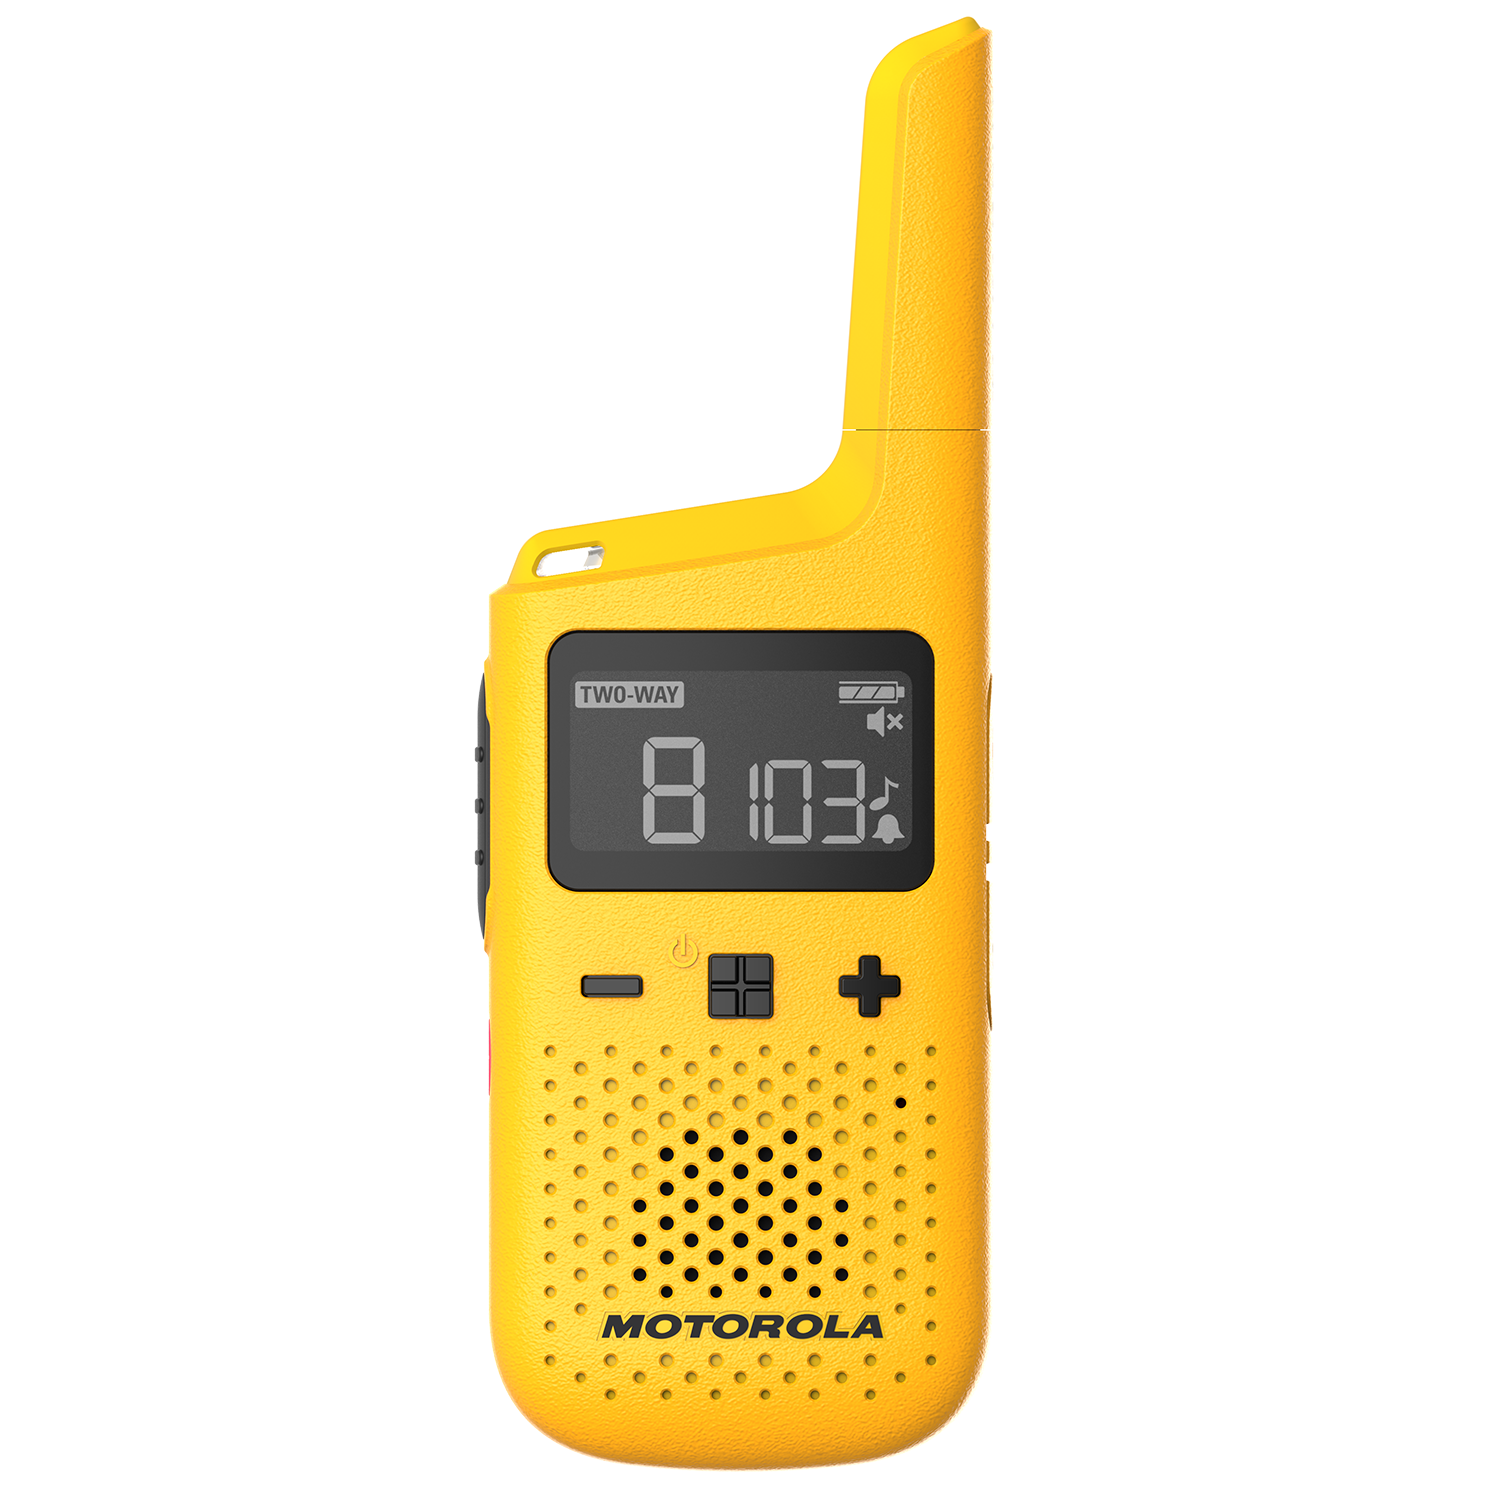 t380 (yellow) walkie talkie front angle with screen on